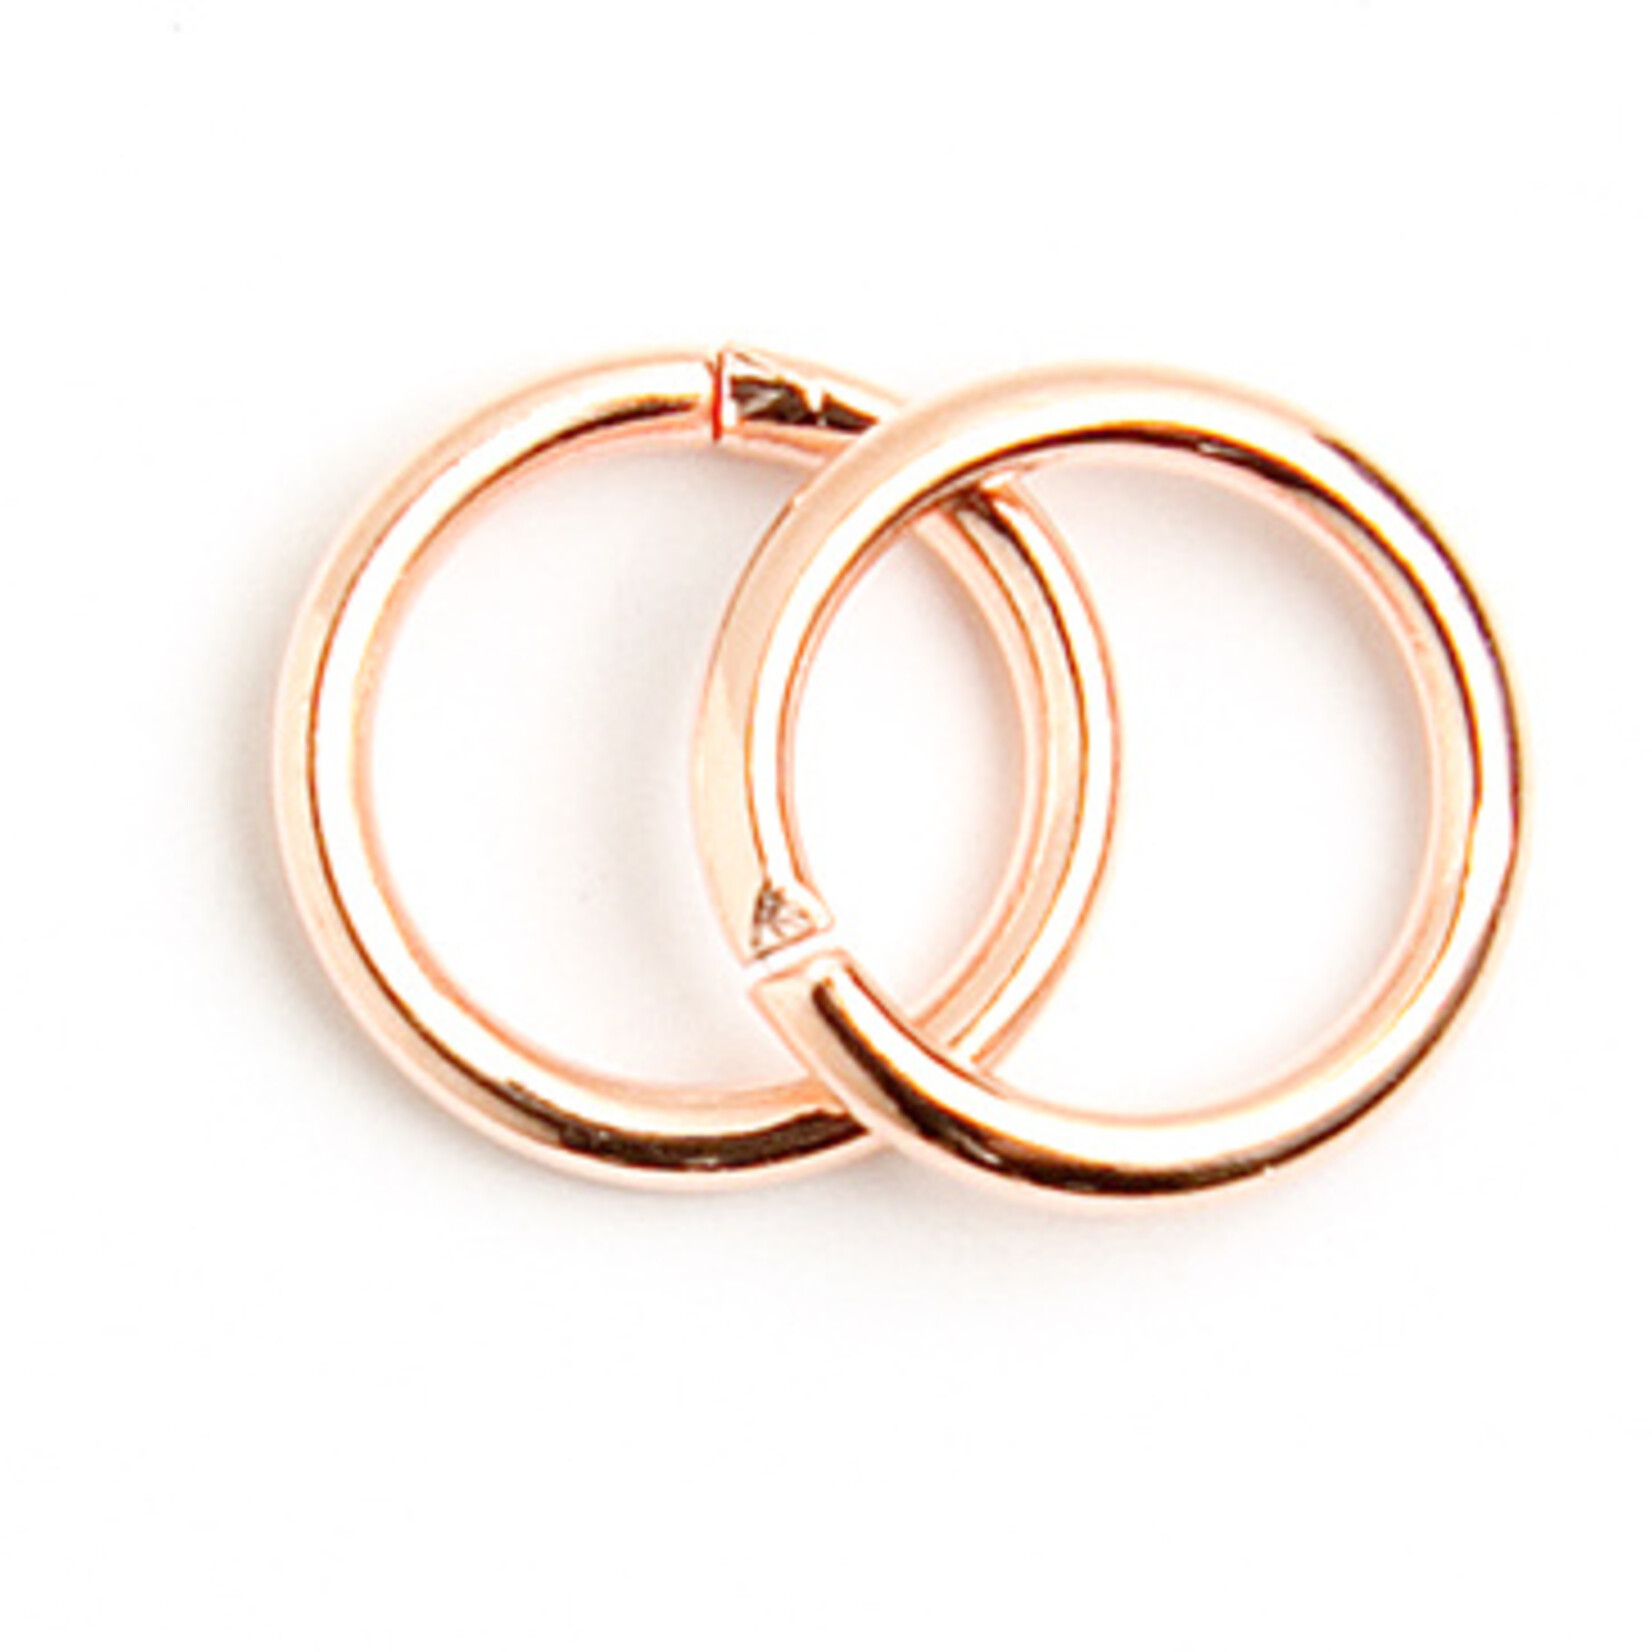 Jump Rings 9mm 16ga -Shiny Copper (12 Pieces)